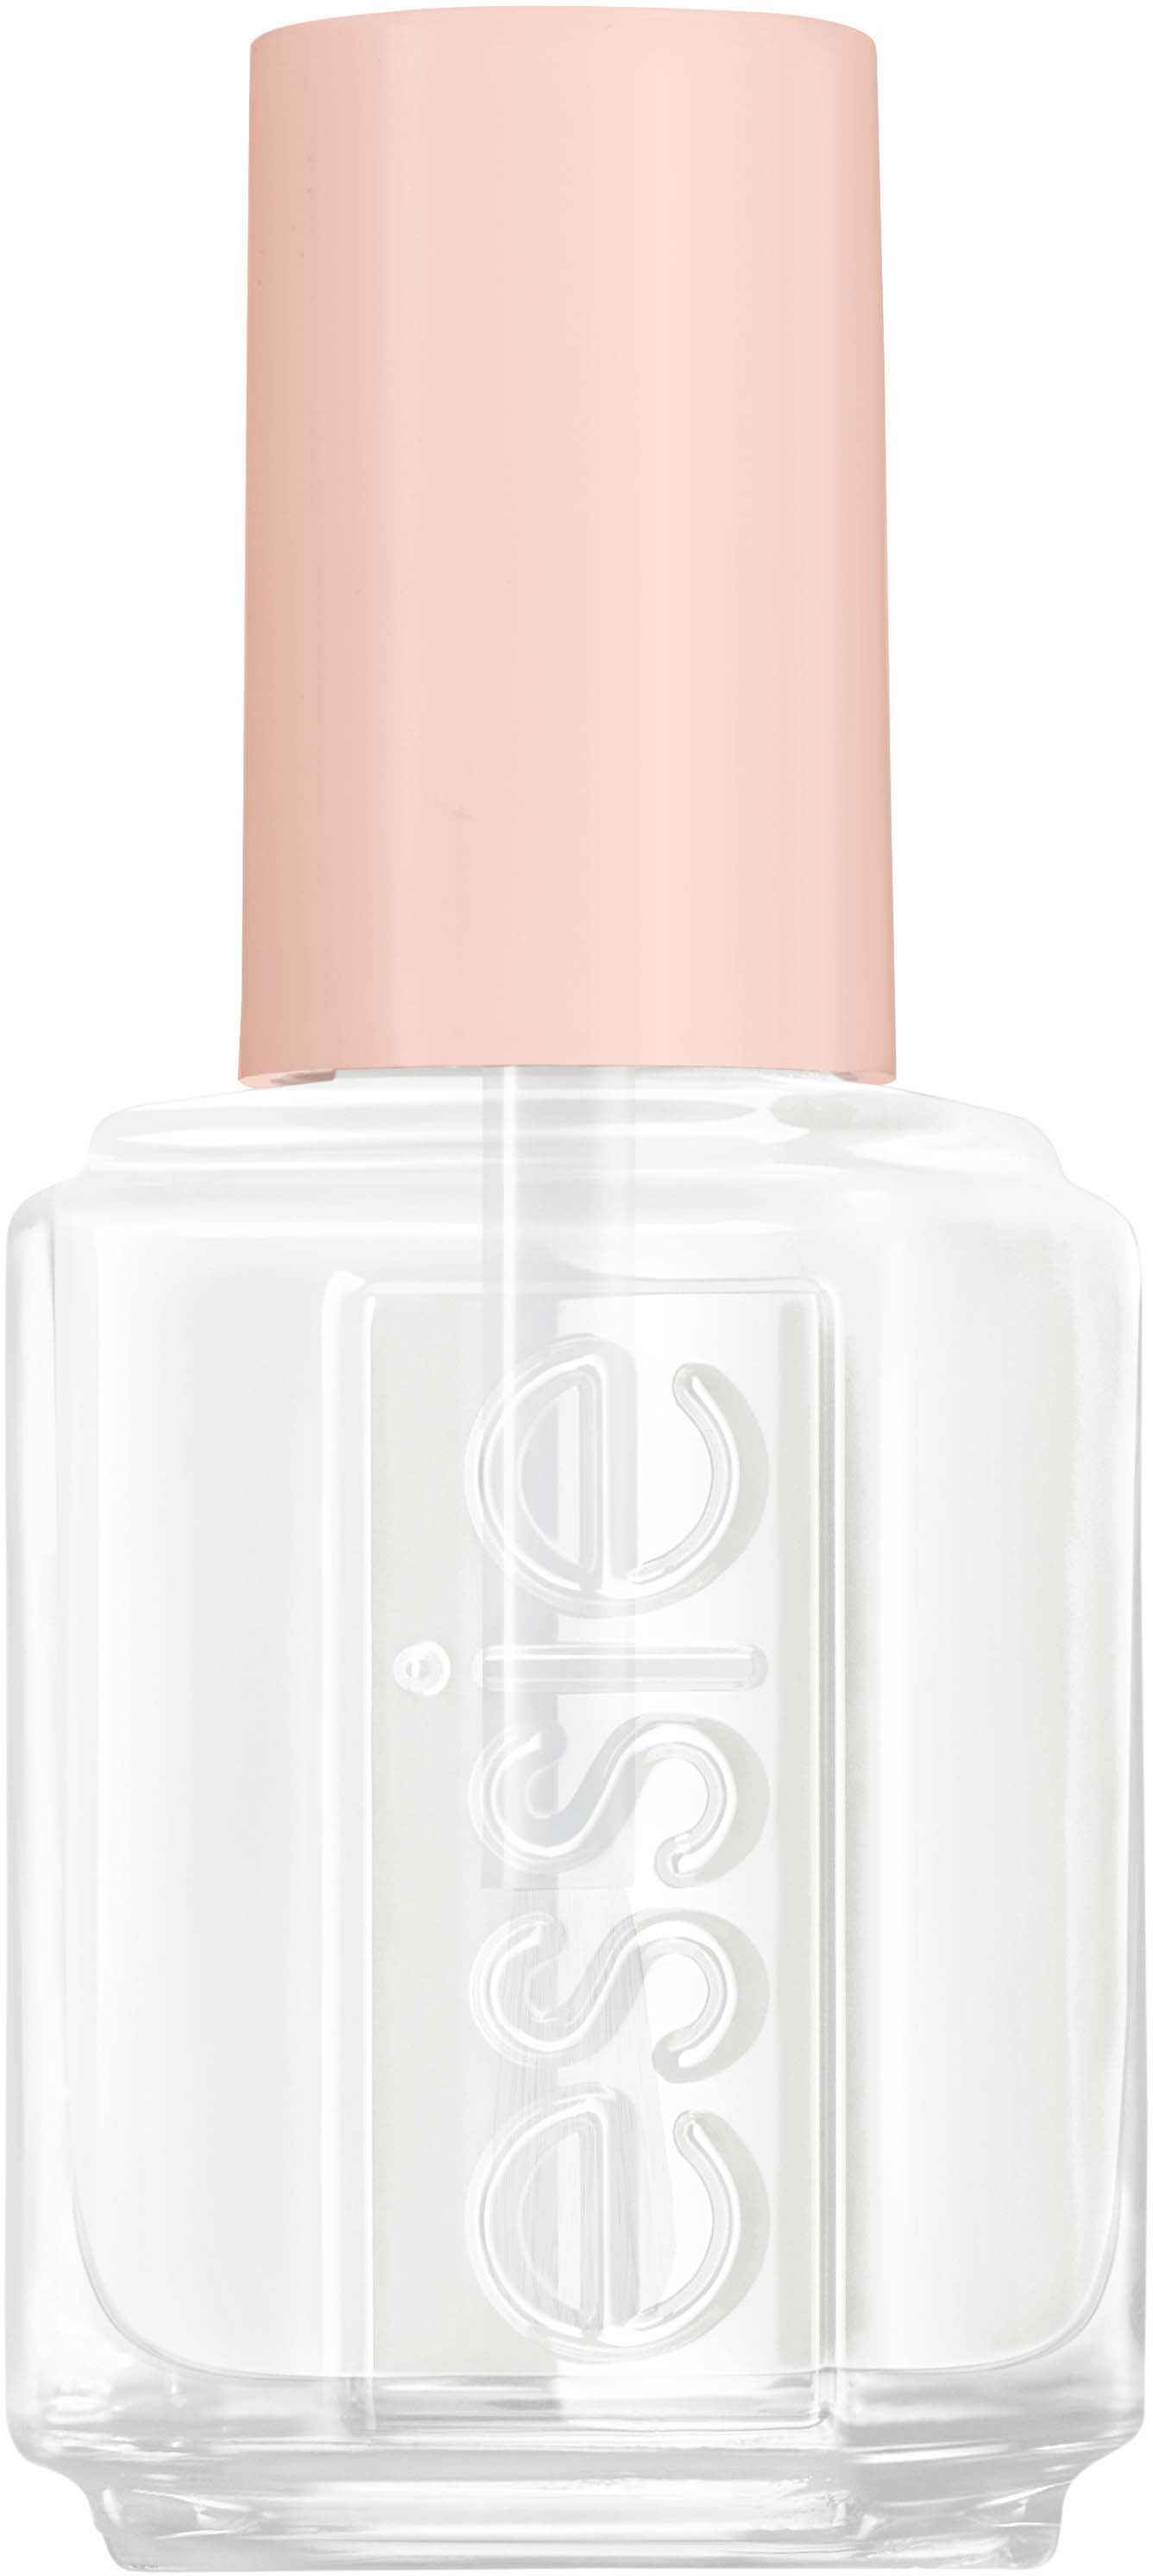 Essie LOVE The Make Color Move Nail 80% 130 Plant-based by Essie